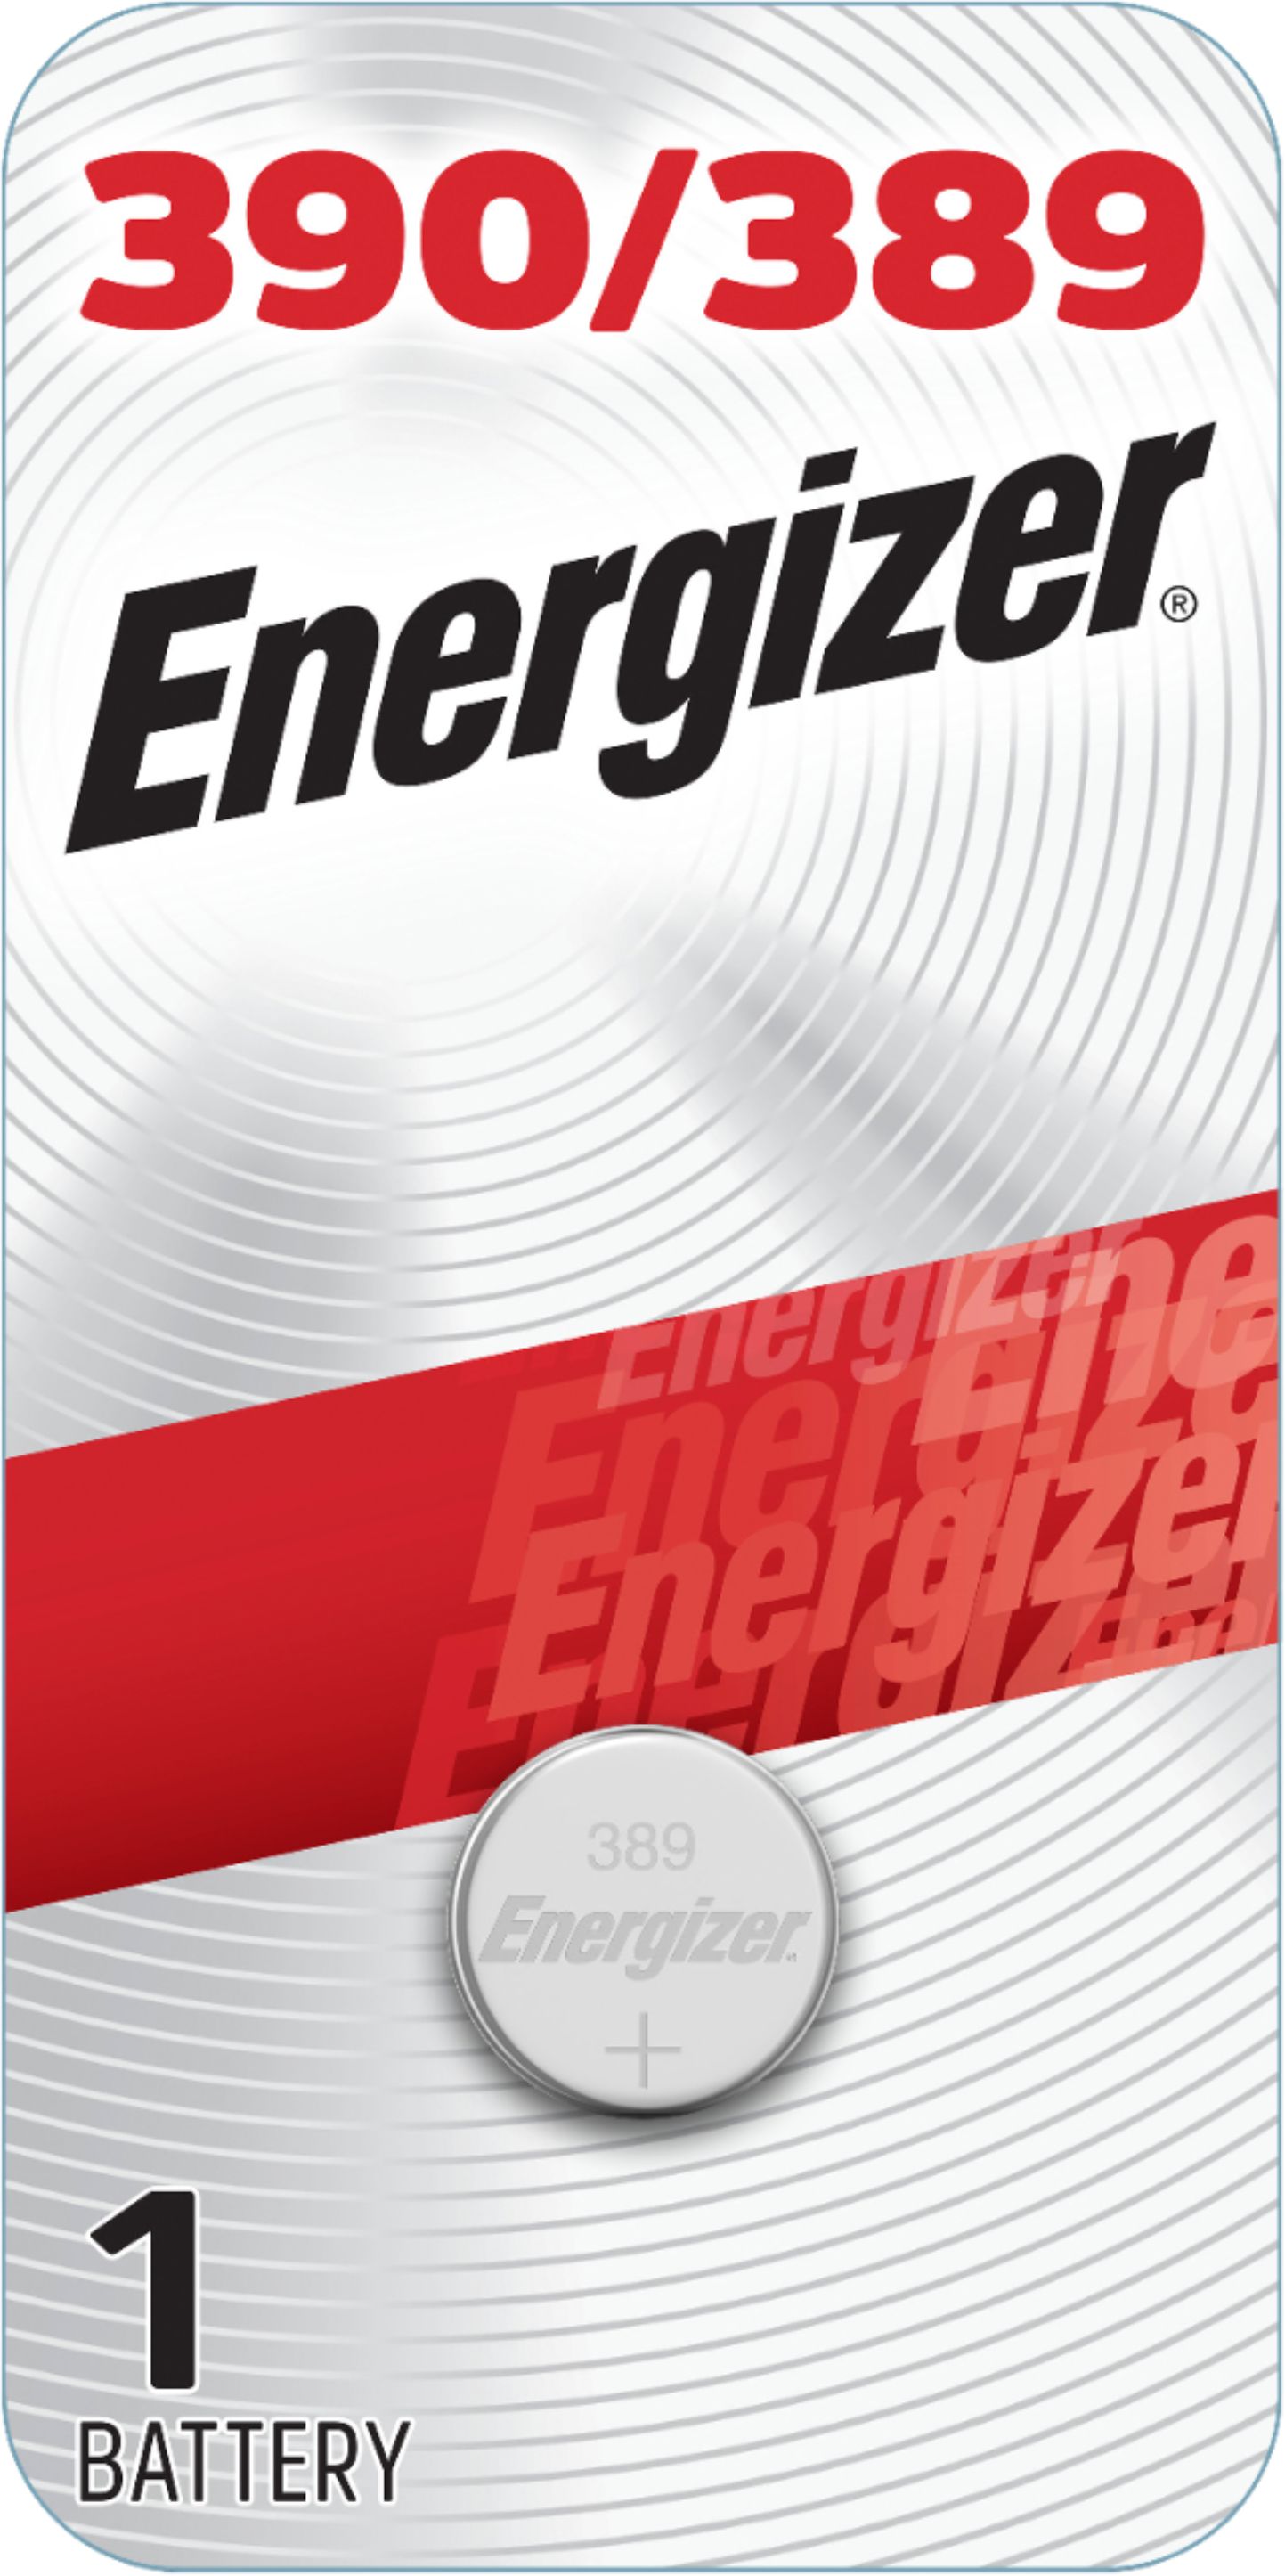 Energizer - 389 Silver Oxide Button Battery, 1 Pack